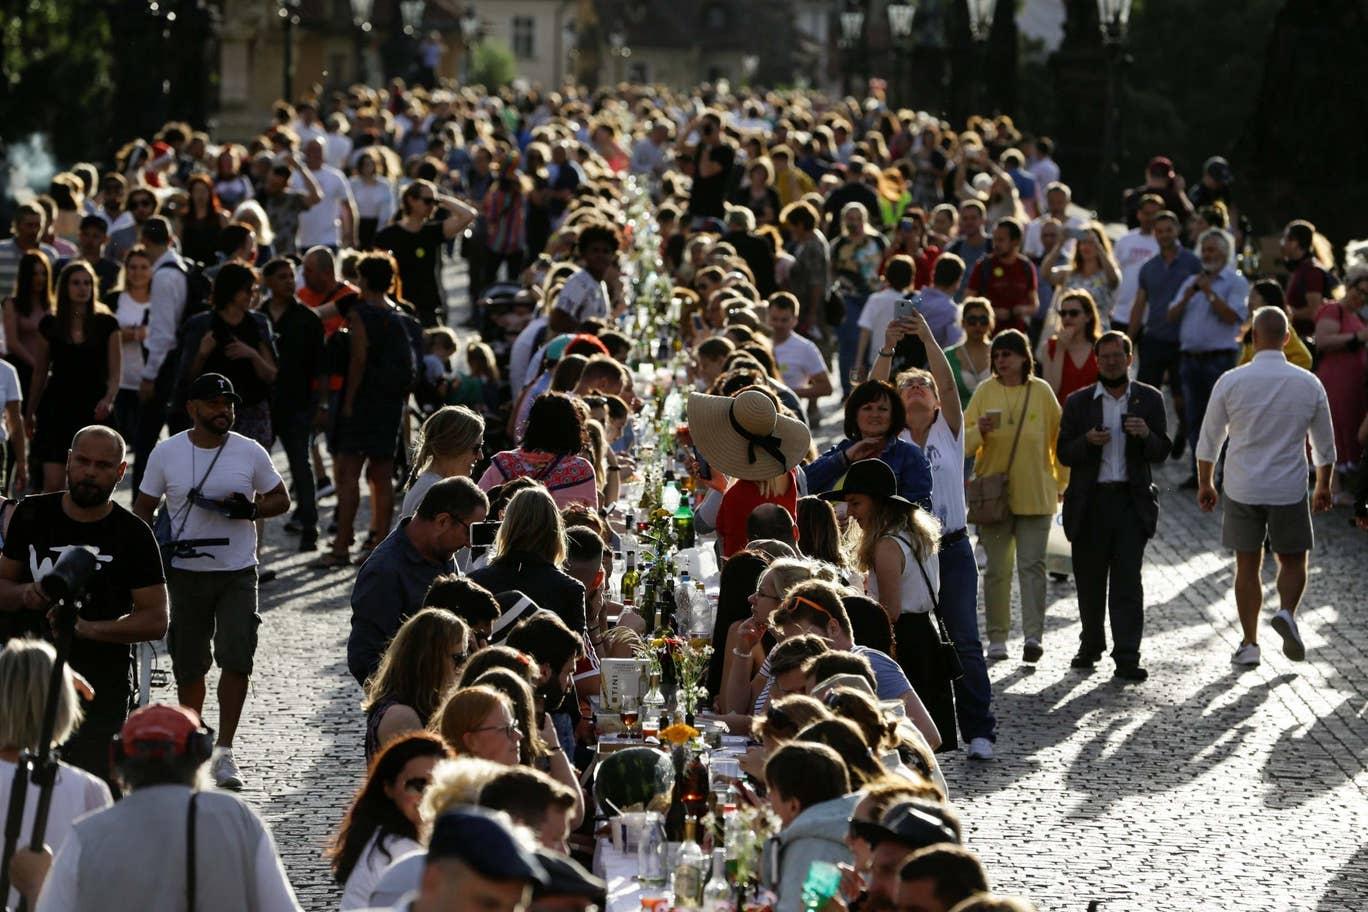 Residents dine at a 500-metre-long table spanning across the length of the medieval Charles Bridge in Prague